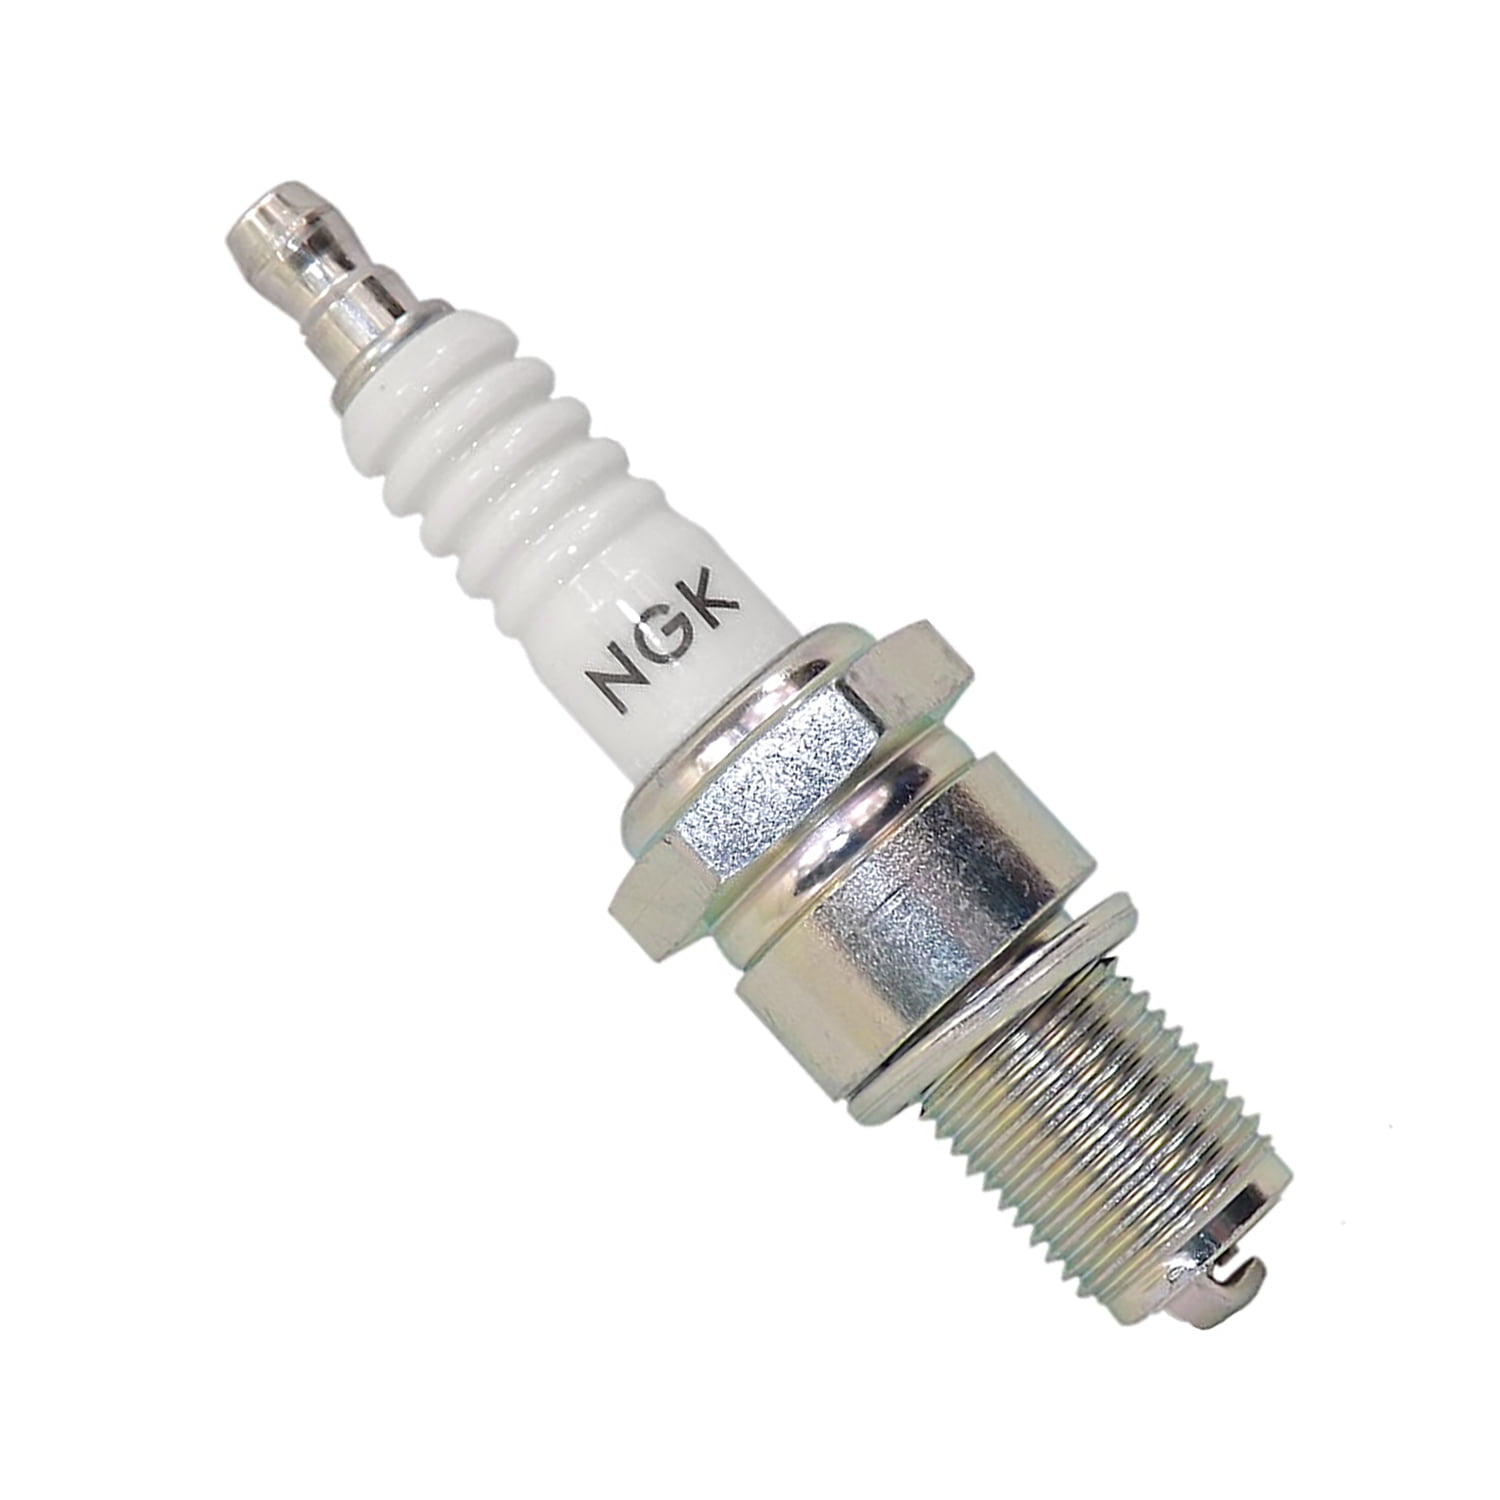 5110 Trade Price 4 Pack NEW GENUINE NGK Replacement SPARK PLUGS B7HS Stock No 